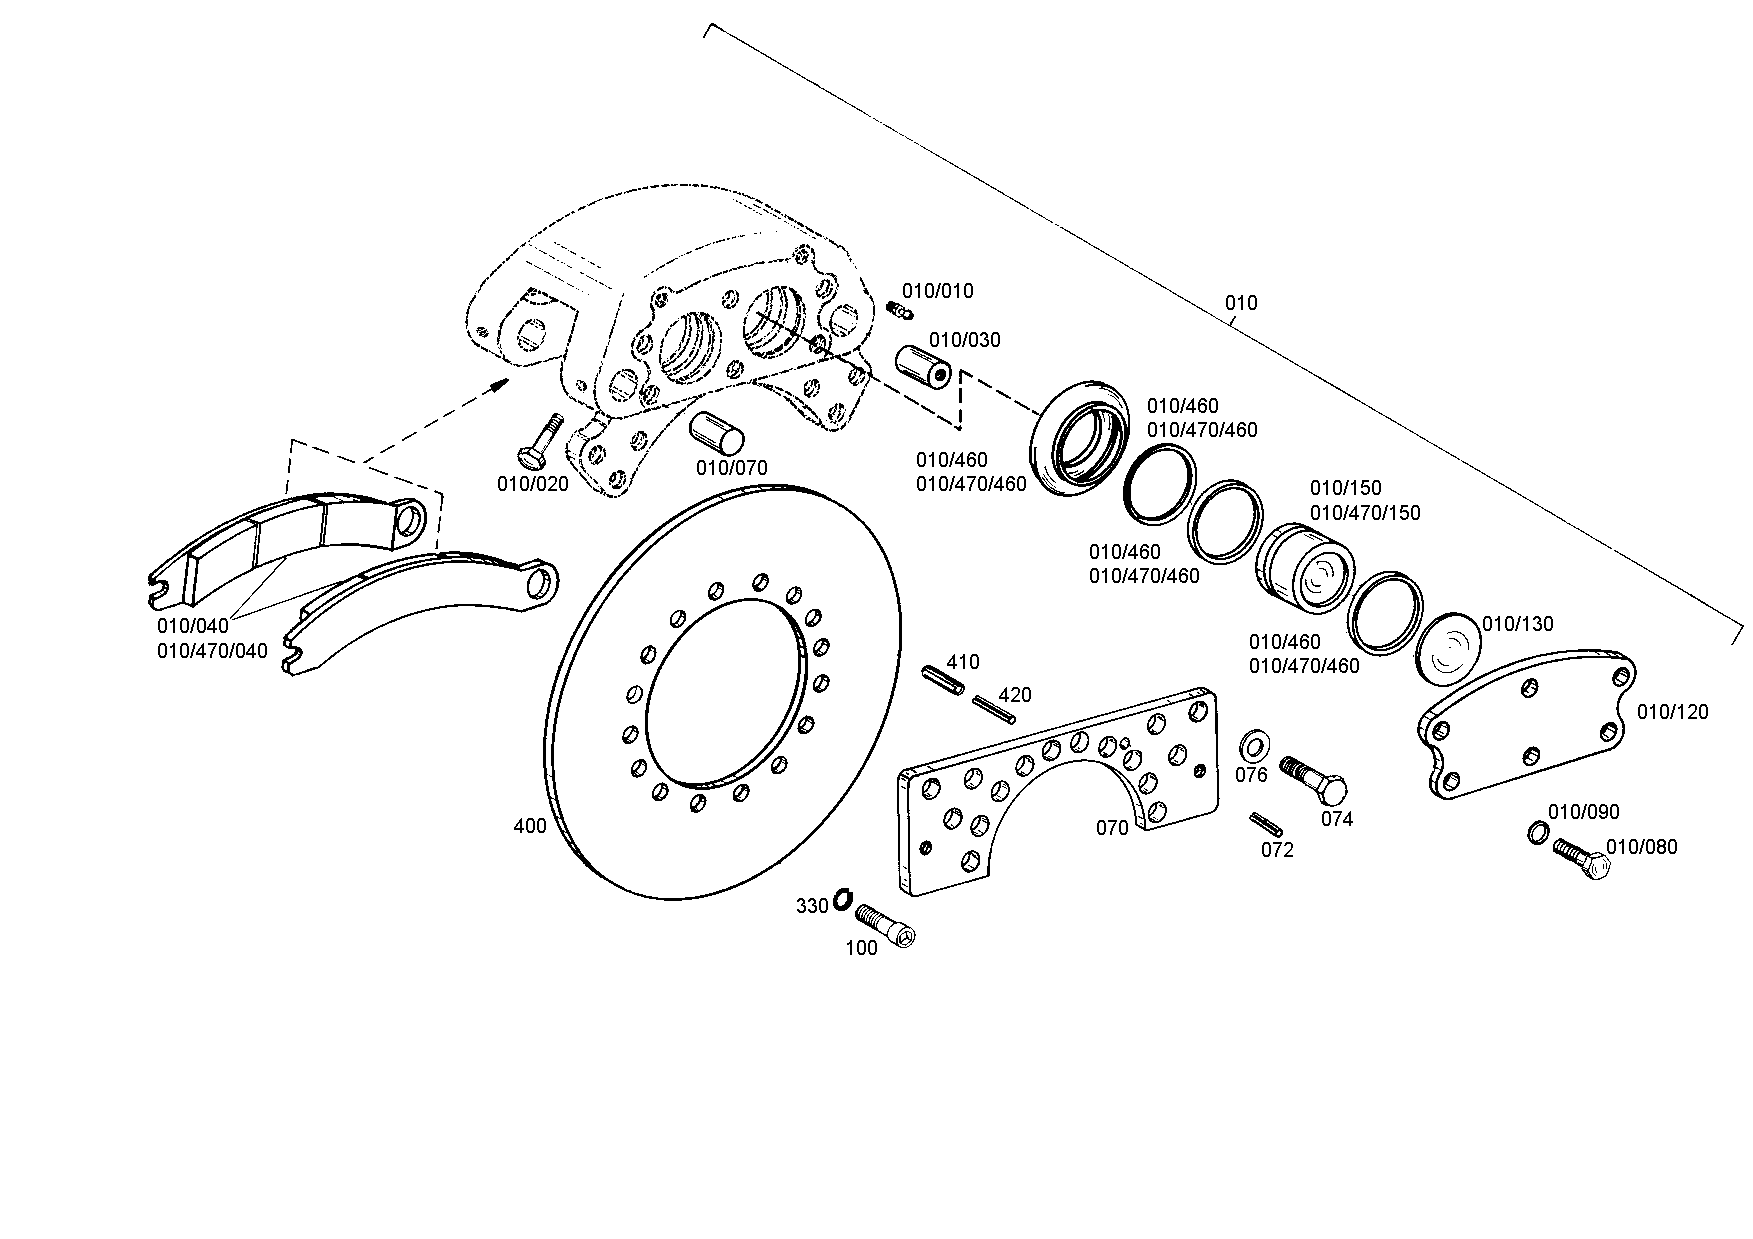 drawing for TIMONEY TECHNOLOGIE LTD. 5904657949 - WASHER (figure 3)